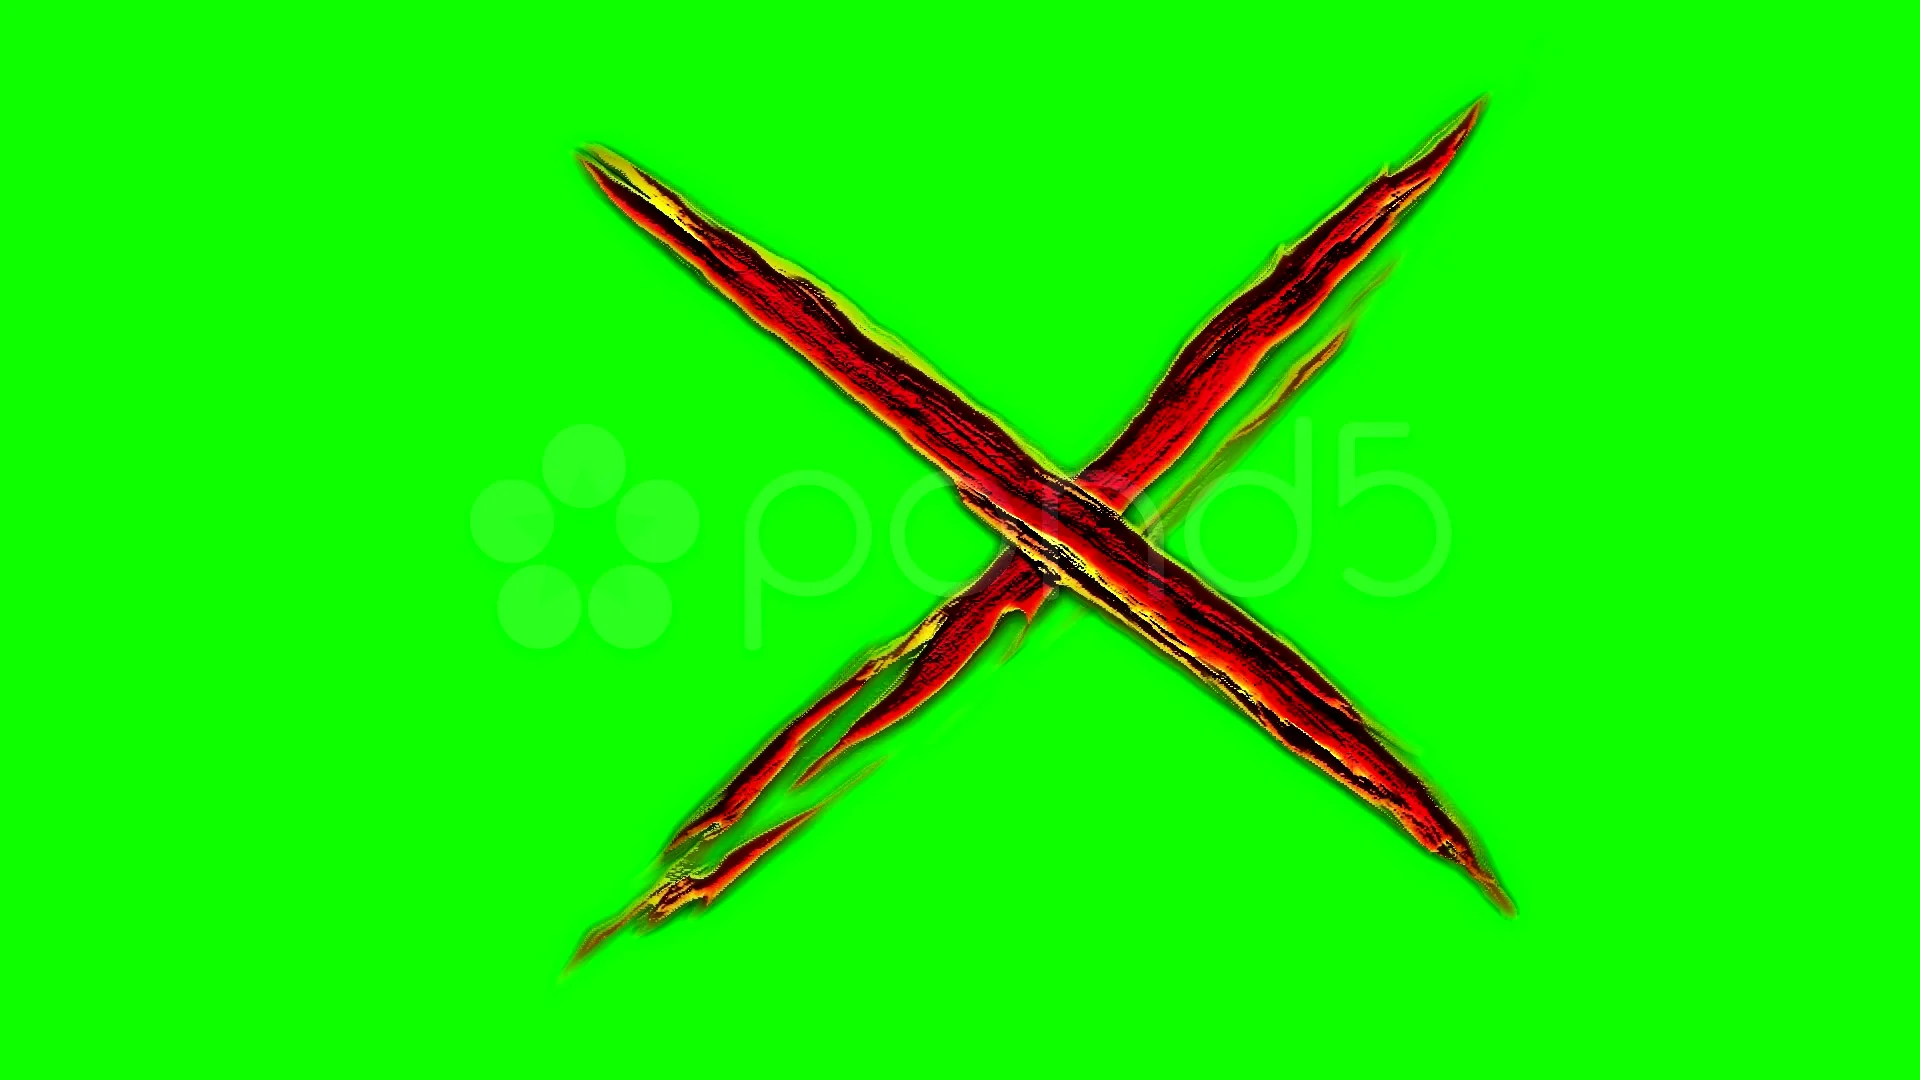 Creative designs of letter X with green background For logos and graphic designs